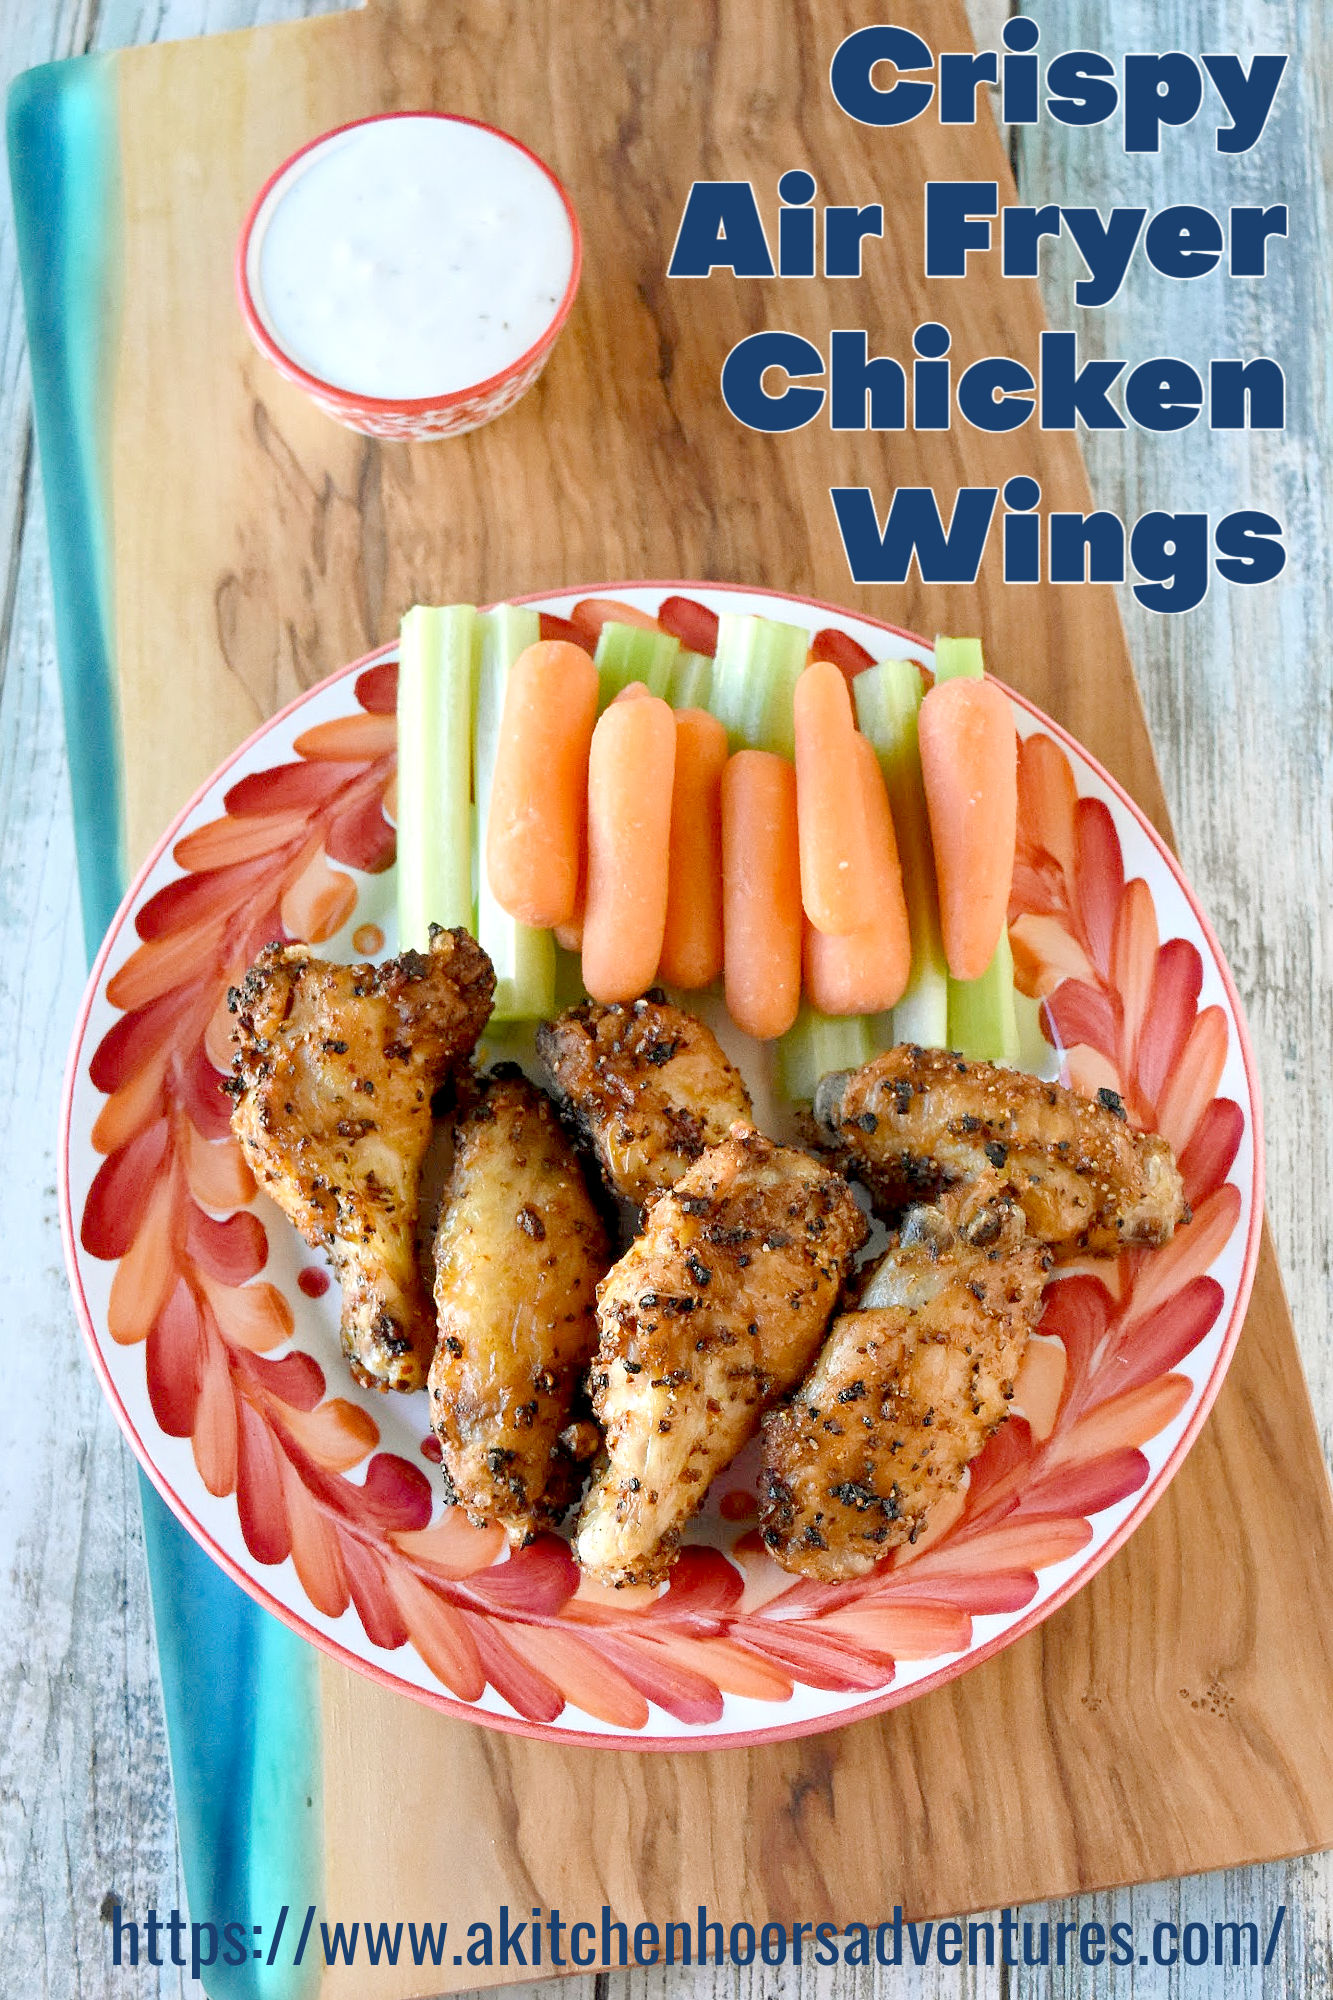 Crispy Air Fryer Chicken Wings are super crispy, delicious, and on your plate in under 25 minutes. I used a gochujang-based rub, but you can use your favorite rub for these simple wings. #OurFamilyTable